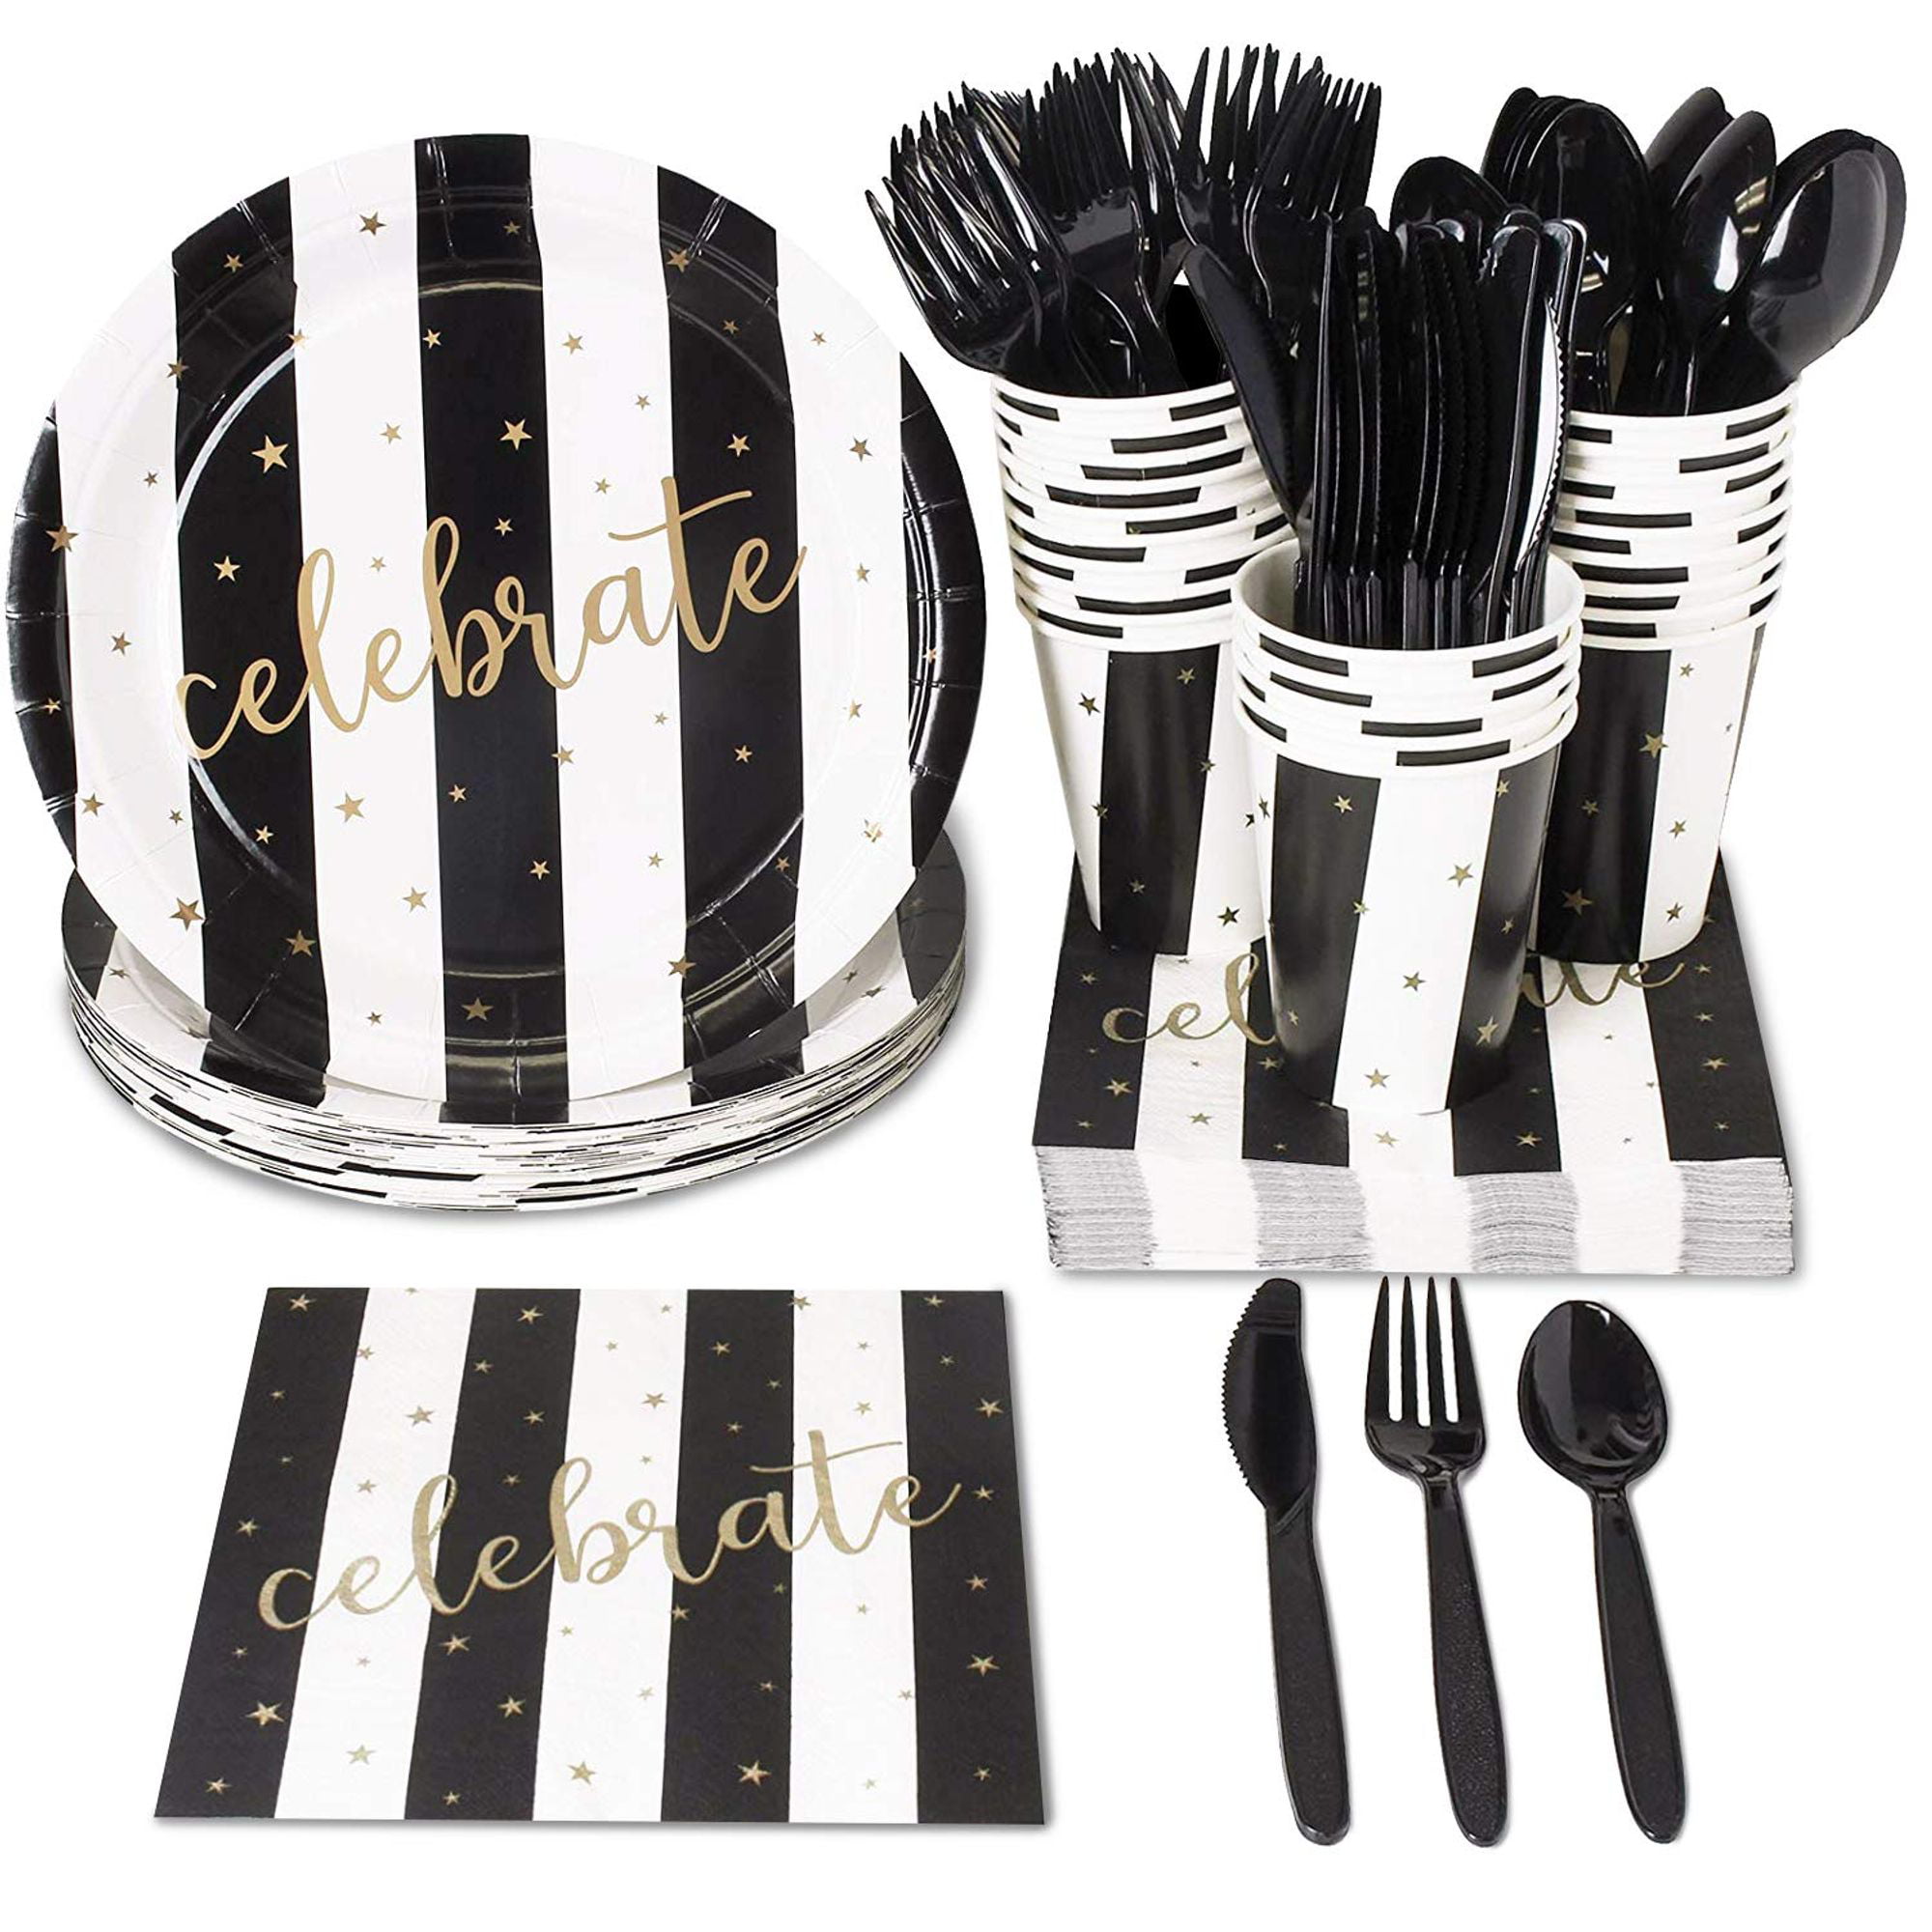 Black and Gold Party Supplies Disposable Black Party Plates Tableware Napkins Cups Cutlery Banner for Cocktail 20s Party 18th 50th 70th Birthday Graduation Plates Gold Black Paper Plates 24 Guests